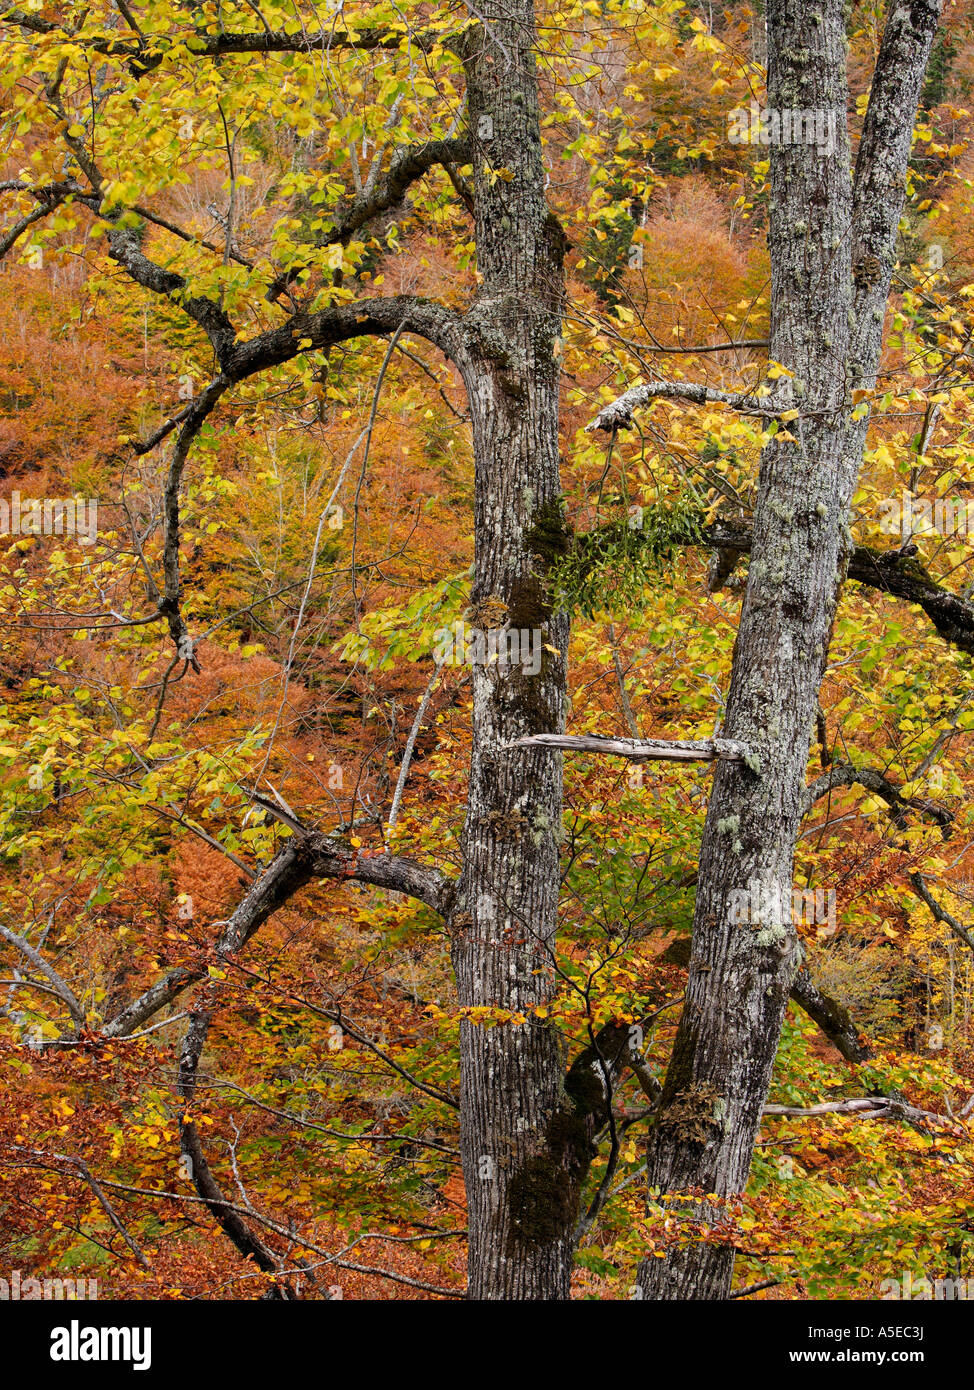 Wych Elm Ulmus glabra in a deciduous forest in autumn Pyrenees ranges Aran valley Catalonia Spain Stock Photo